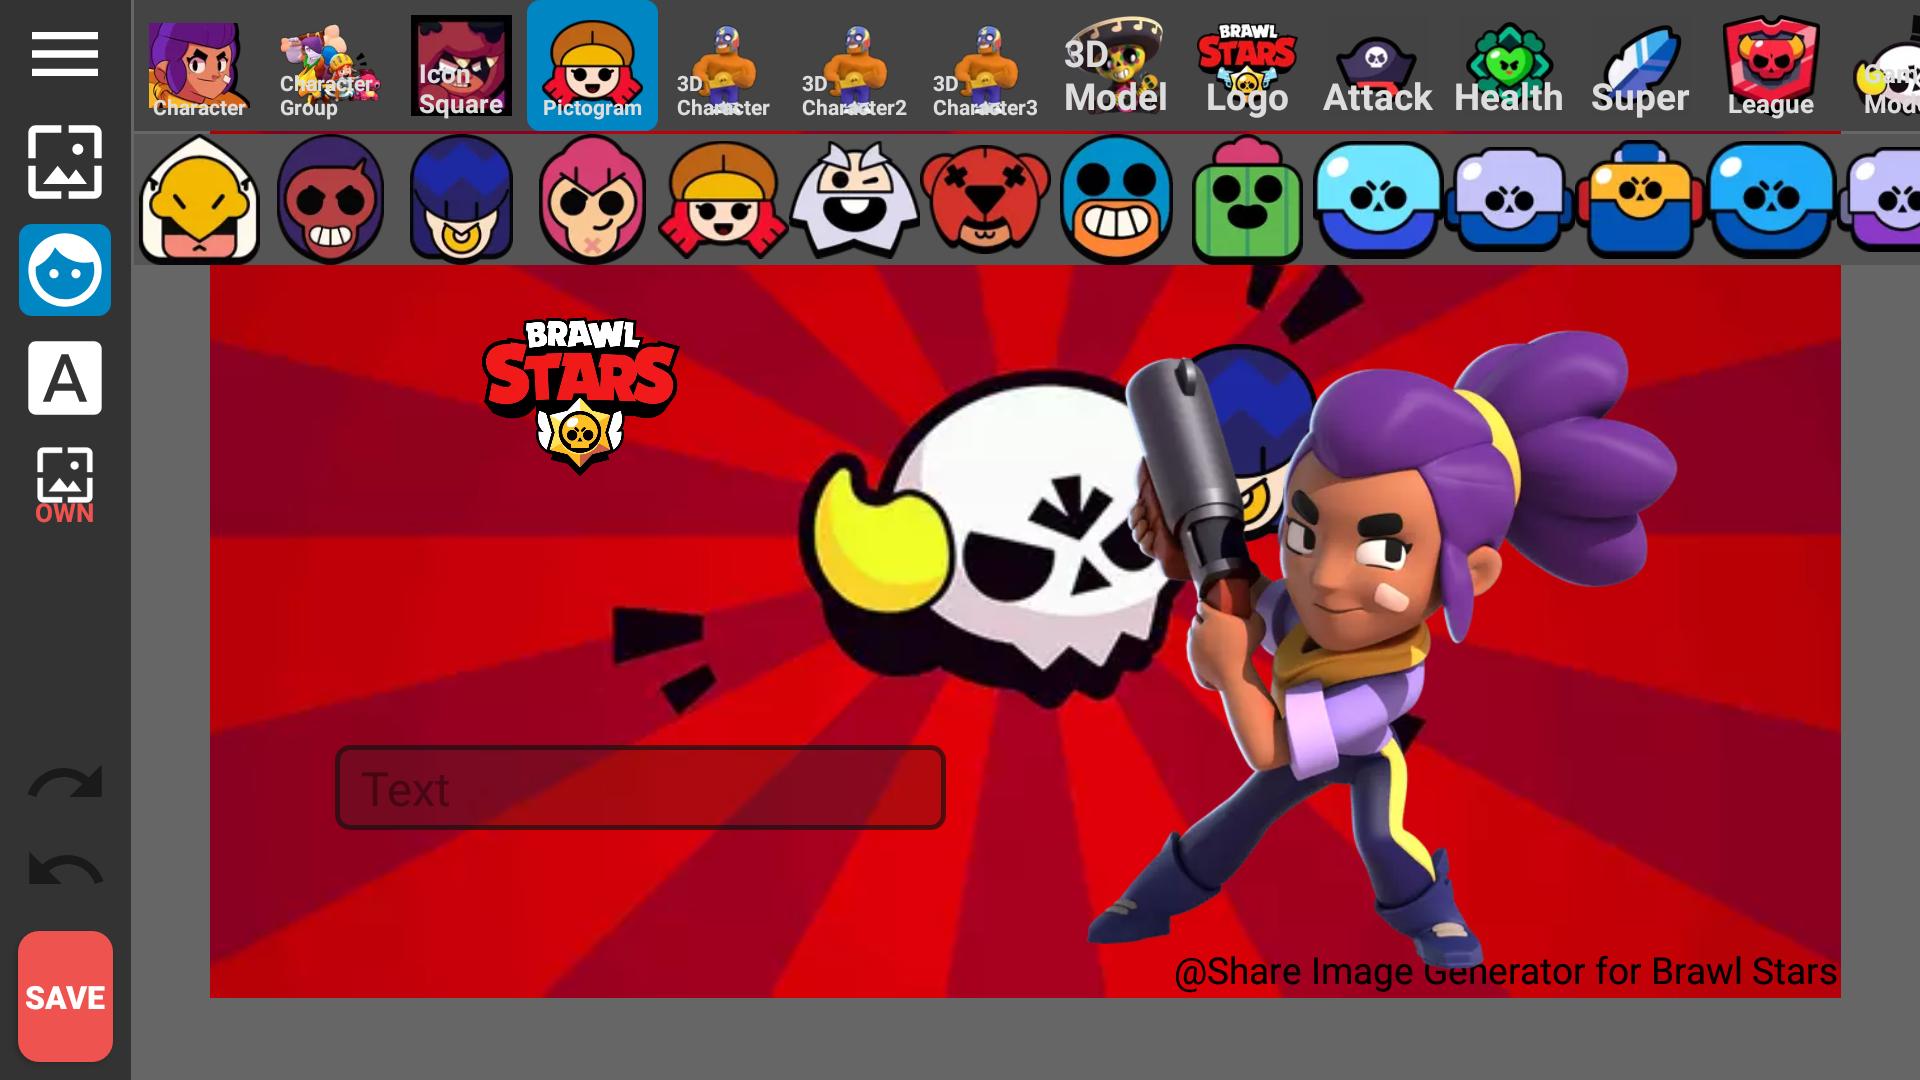 Share Image Generator for Brawl Stars for Android - APK ...